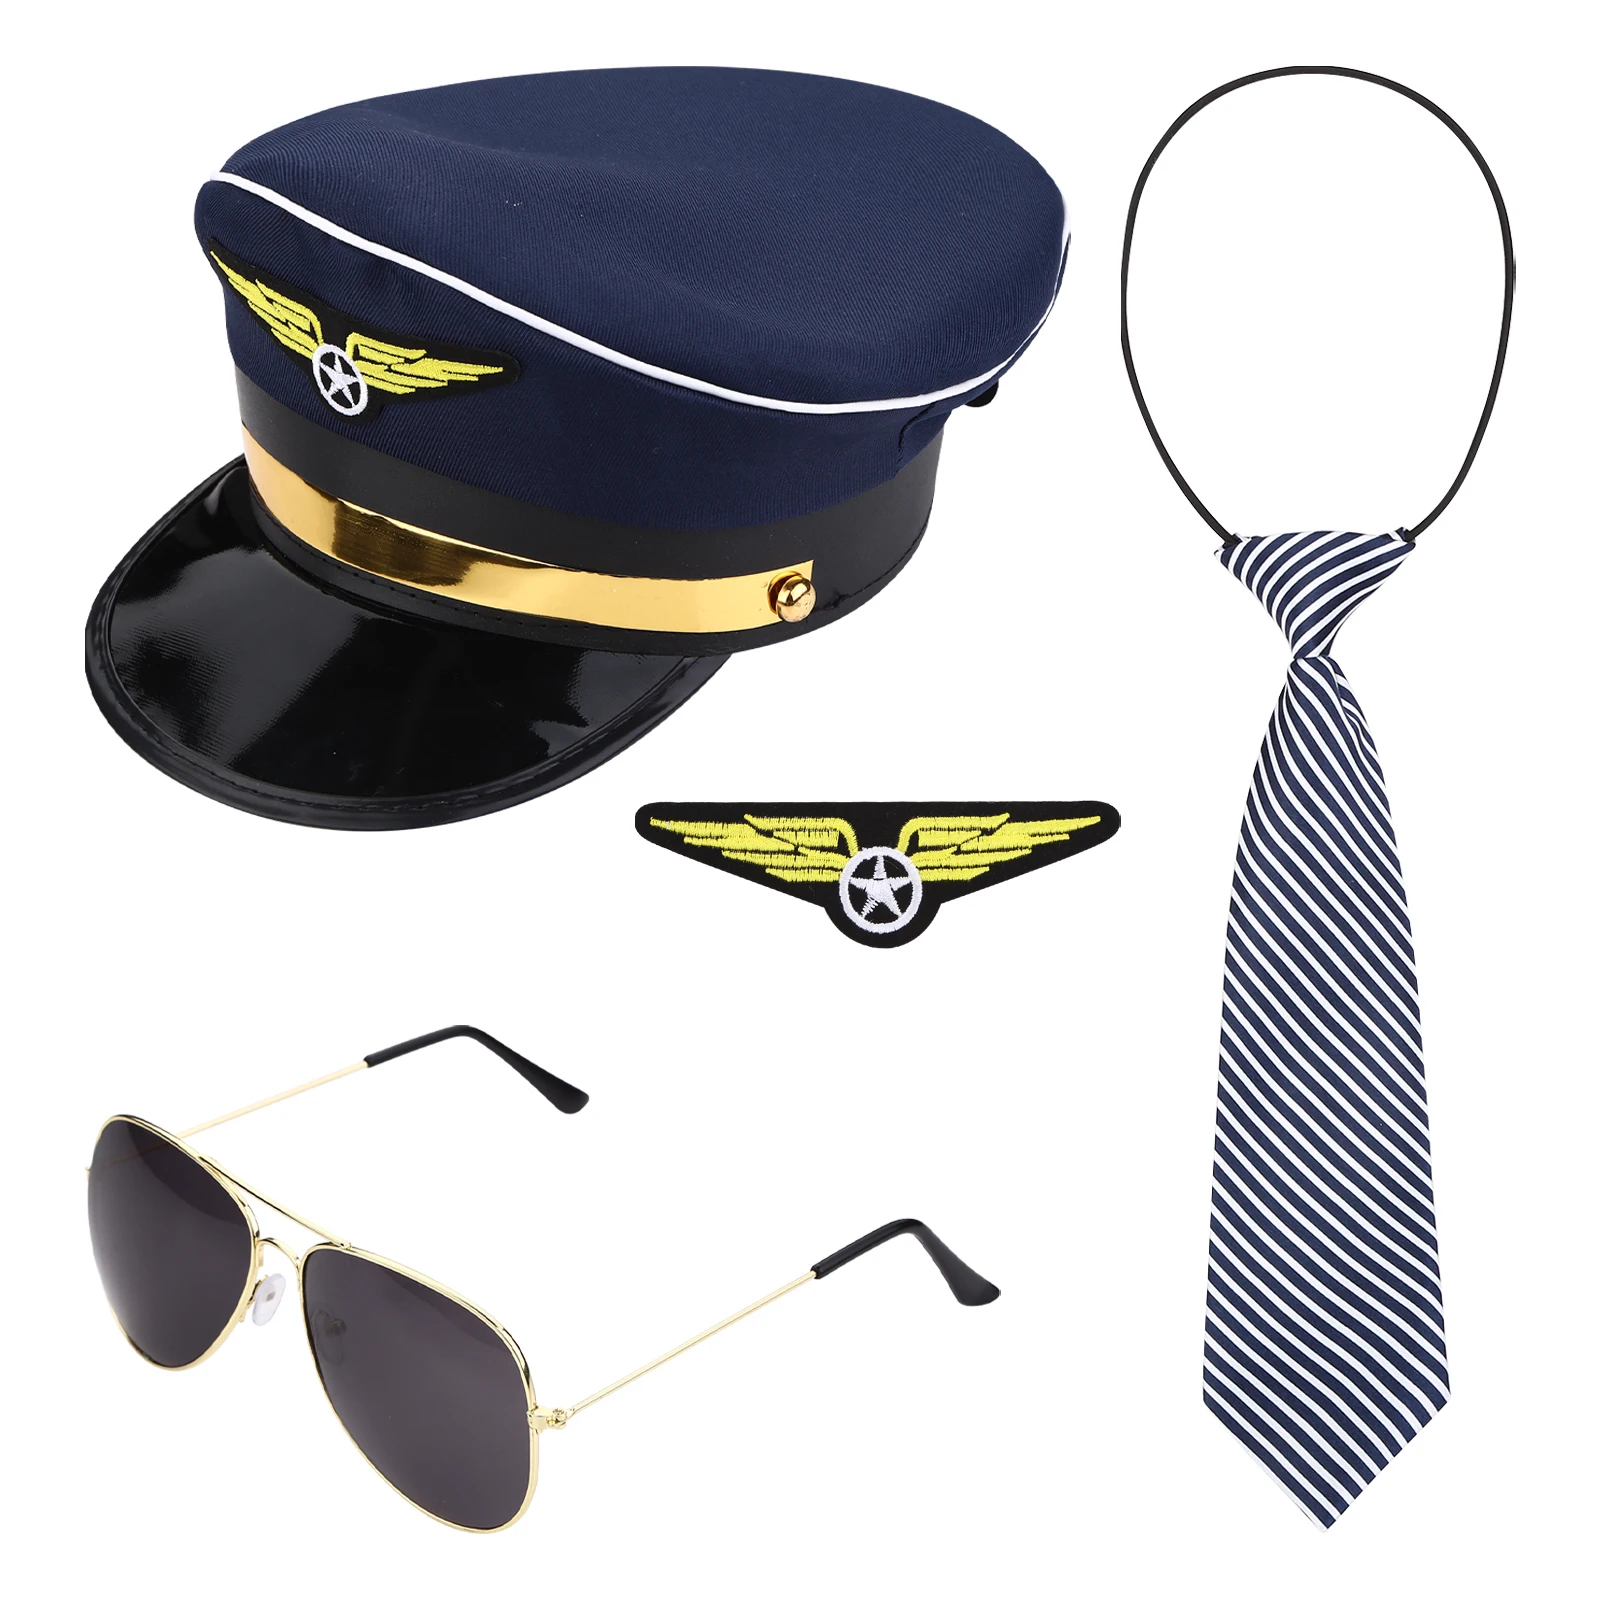 Children Policeman Cosplay Costumes Accessories Military Police Hats Sunglasses Tie Badge for Kids Halloween Carnival Party Prop